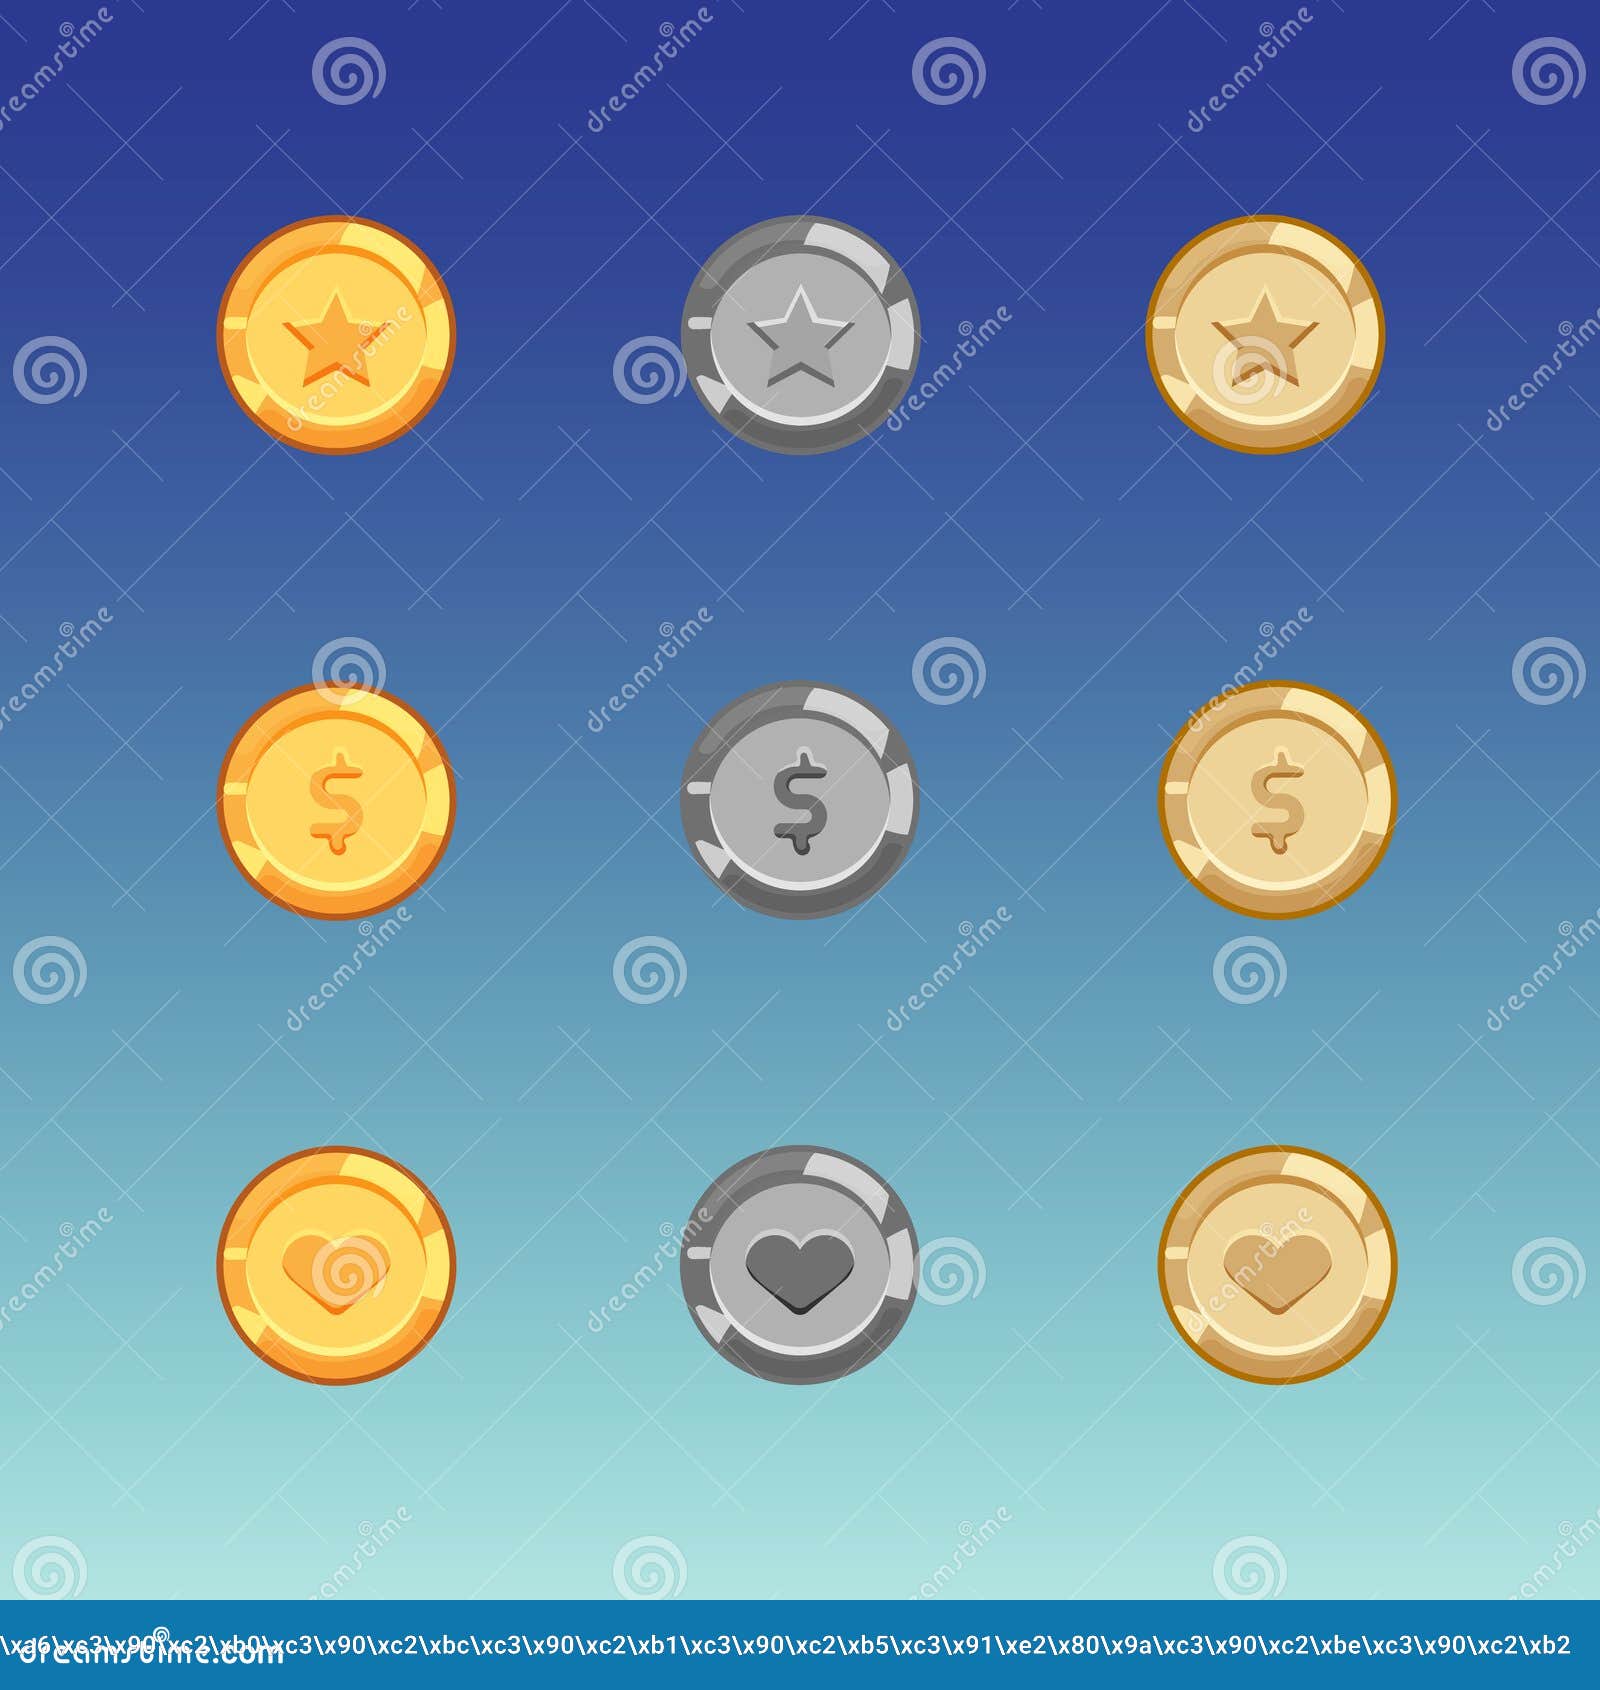 Game coin set stock vector. Illustration of shape, banking ...